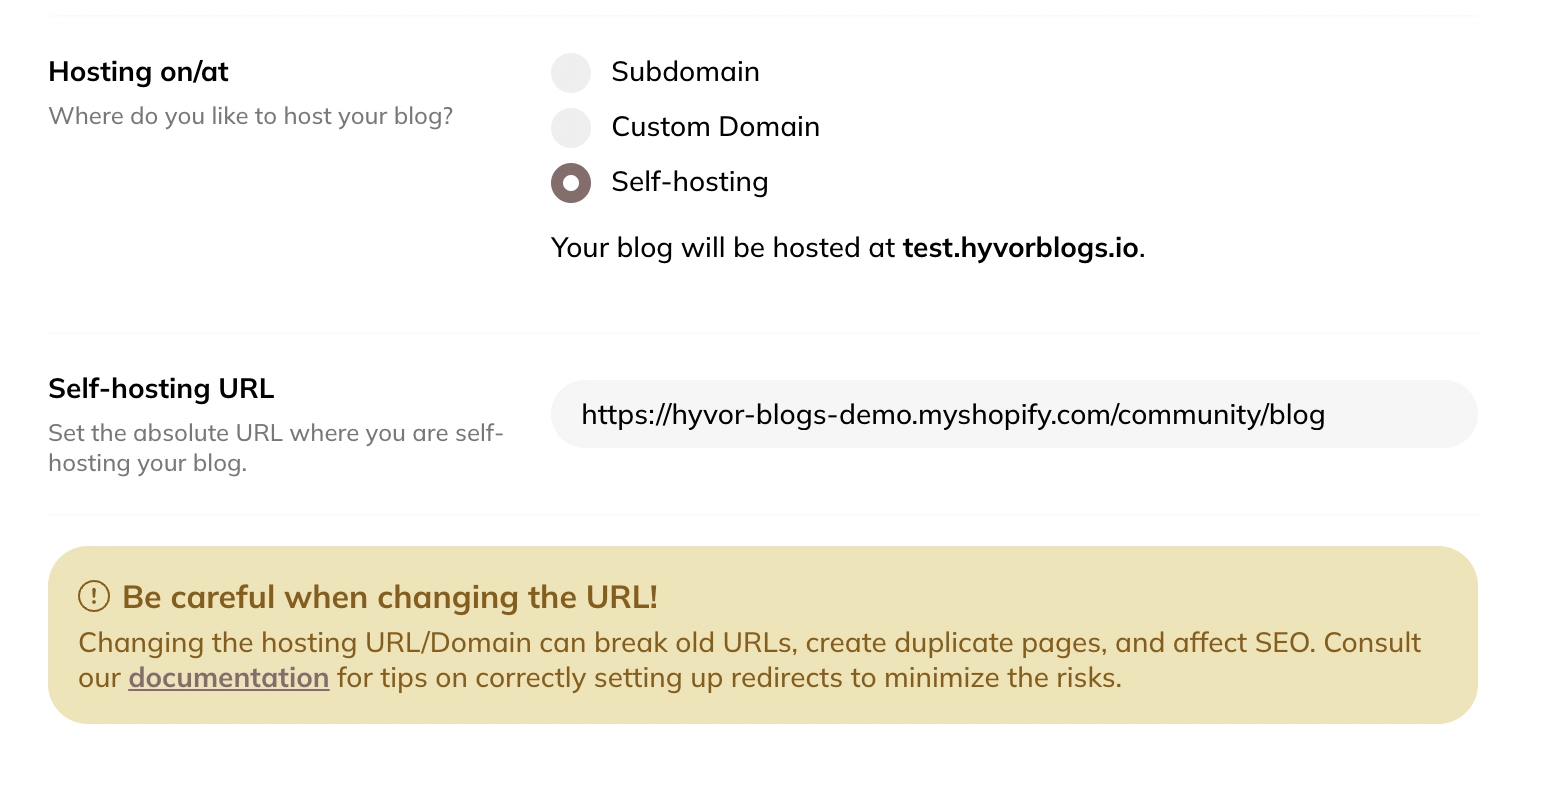 Updating the self-hosting URL in Hyvor Blogs Console